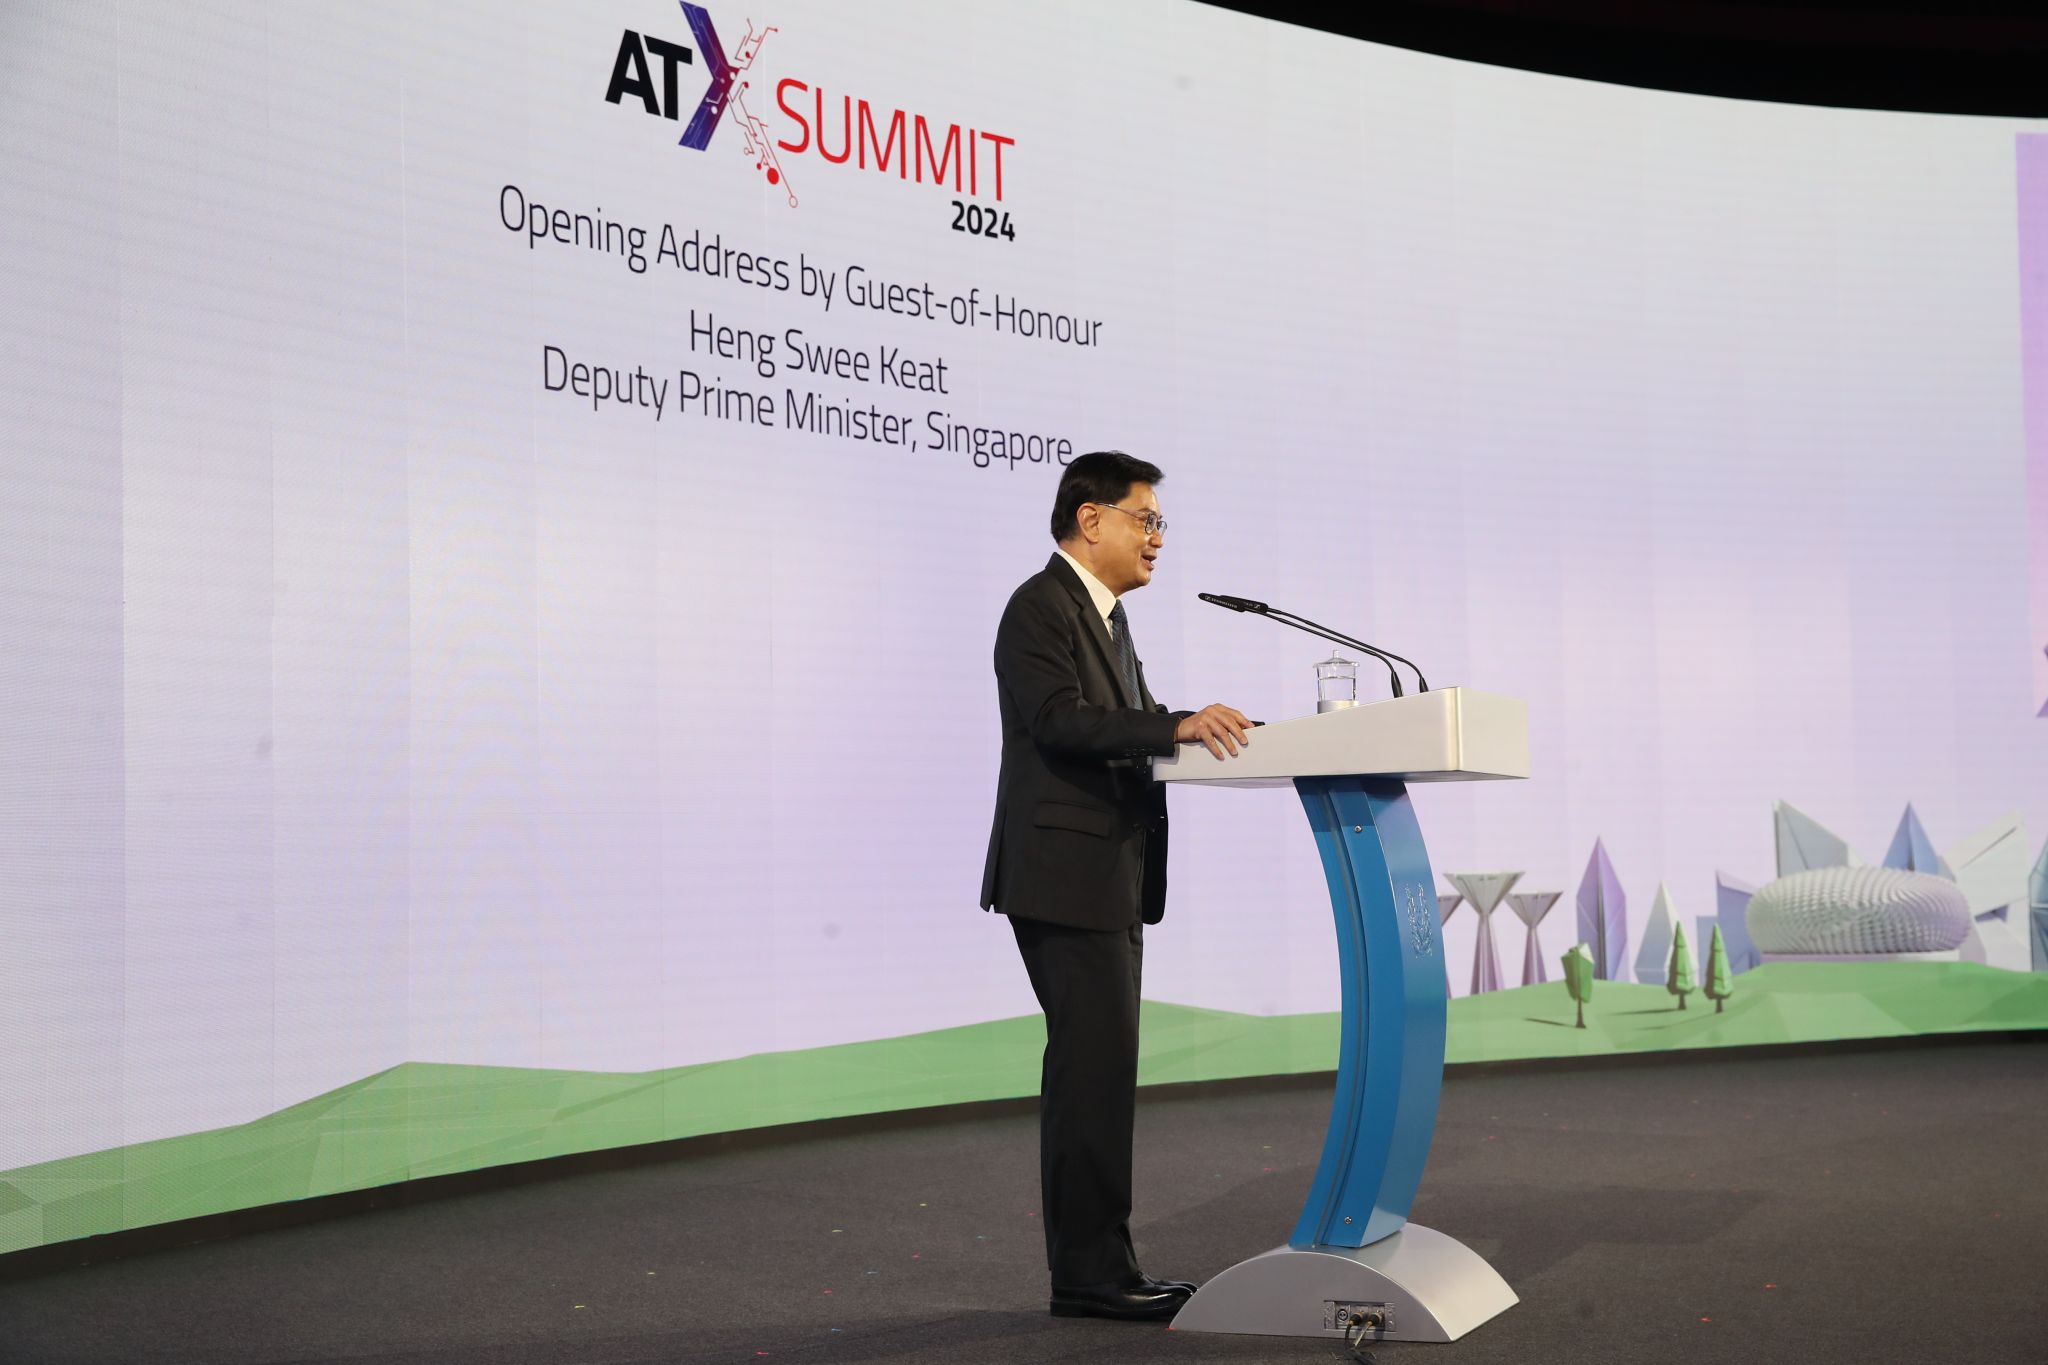 Singapore Deputy Prime Minister Mr Heng Swee Keat on stage at the Asia Tech x Summit on 30 May 2024. The backdrop announces the Opening Address by Guest-of-Honour Mr Heng.